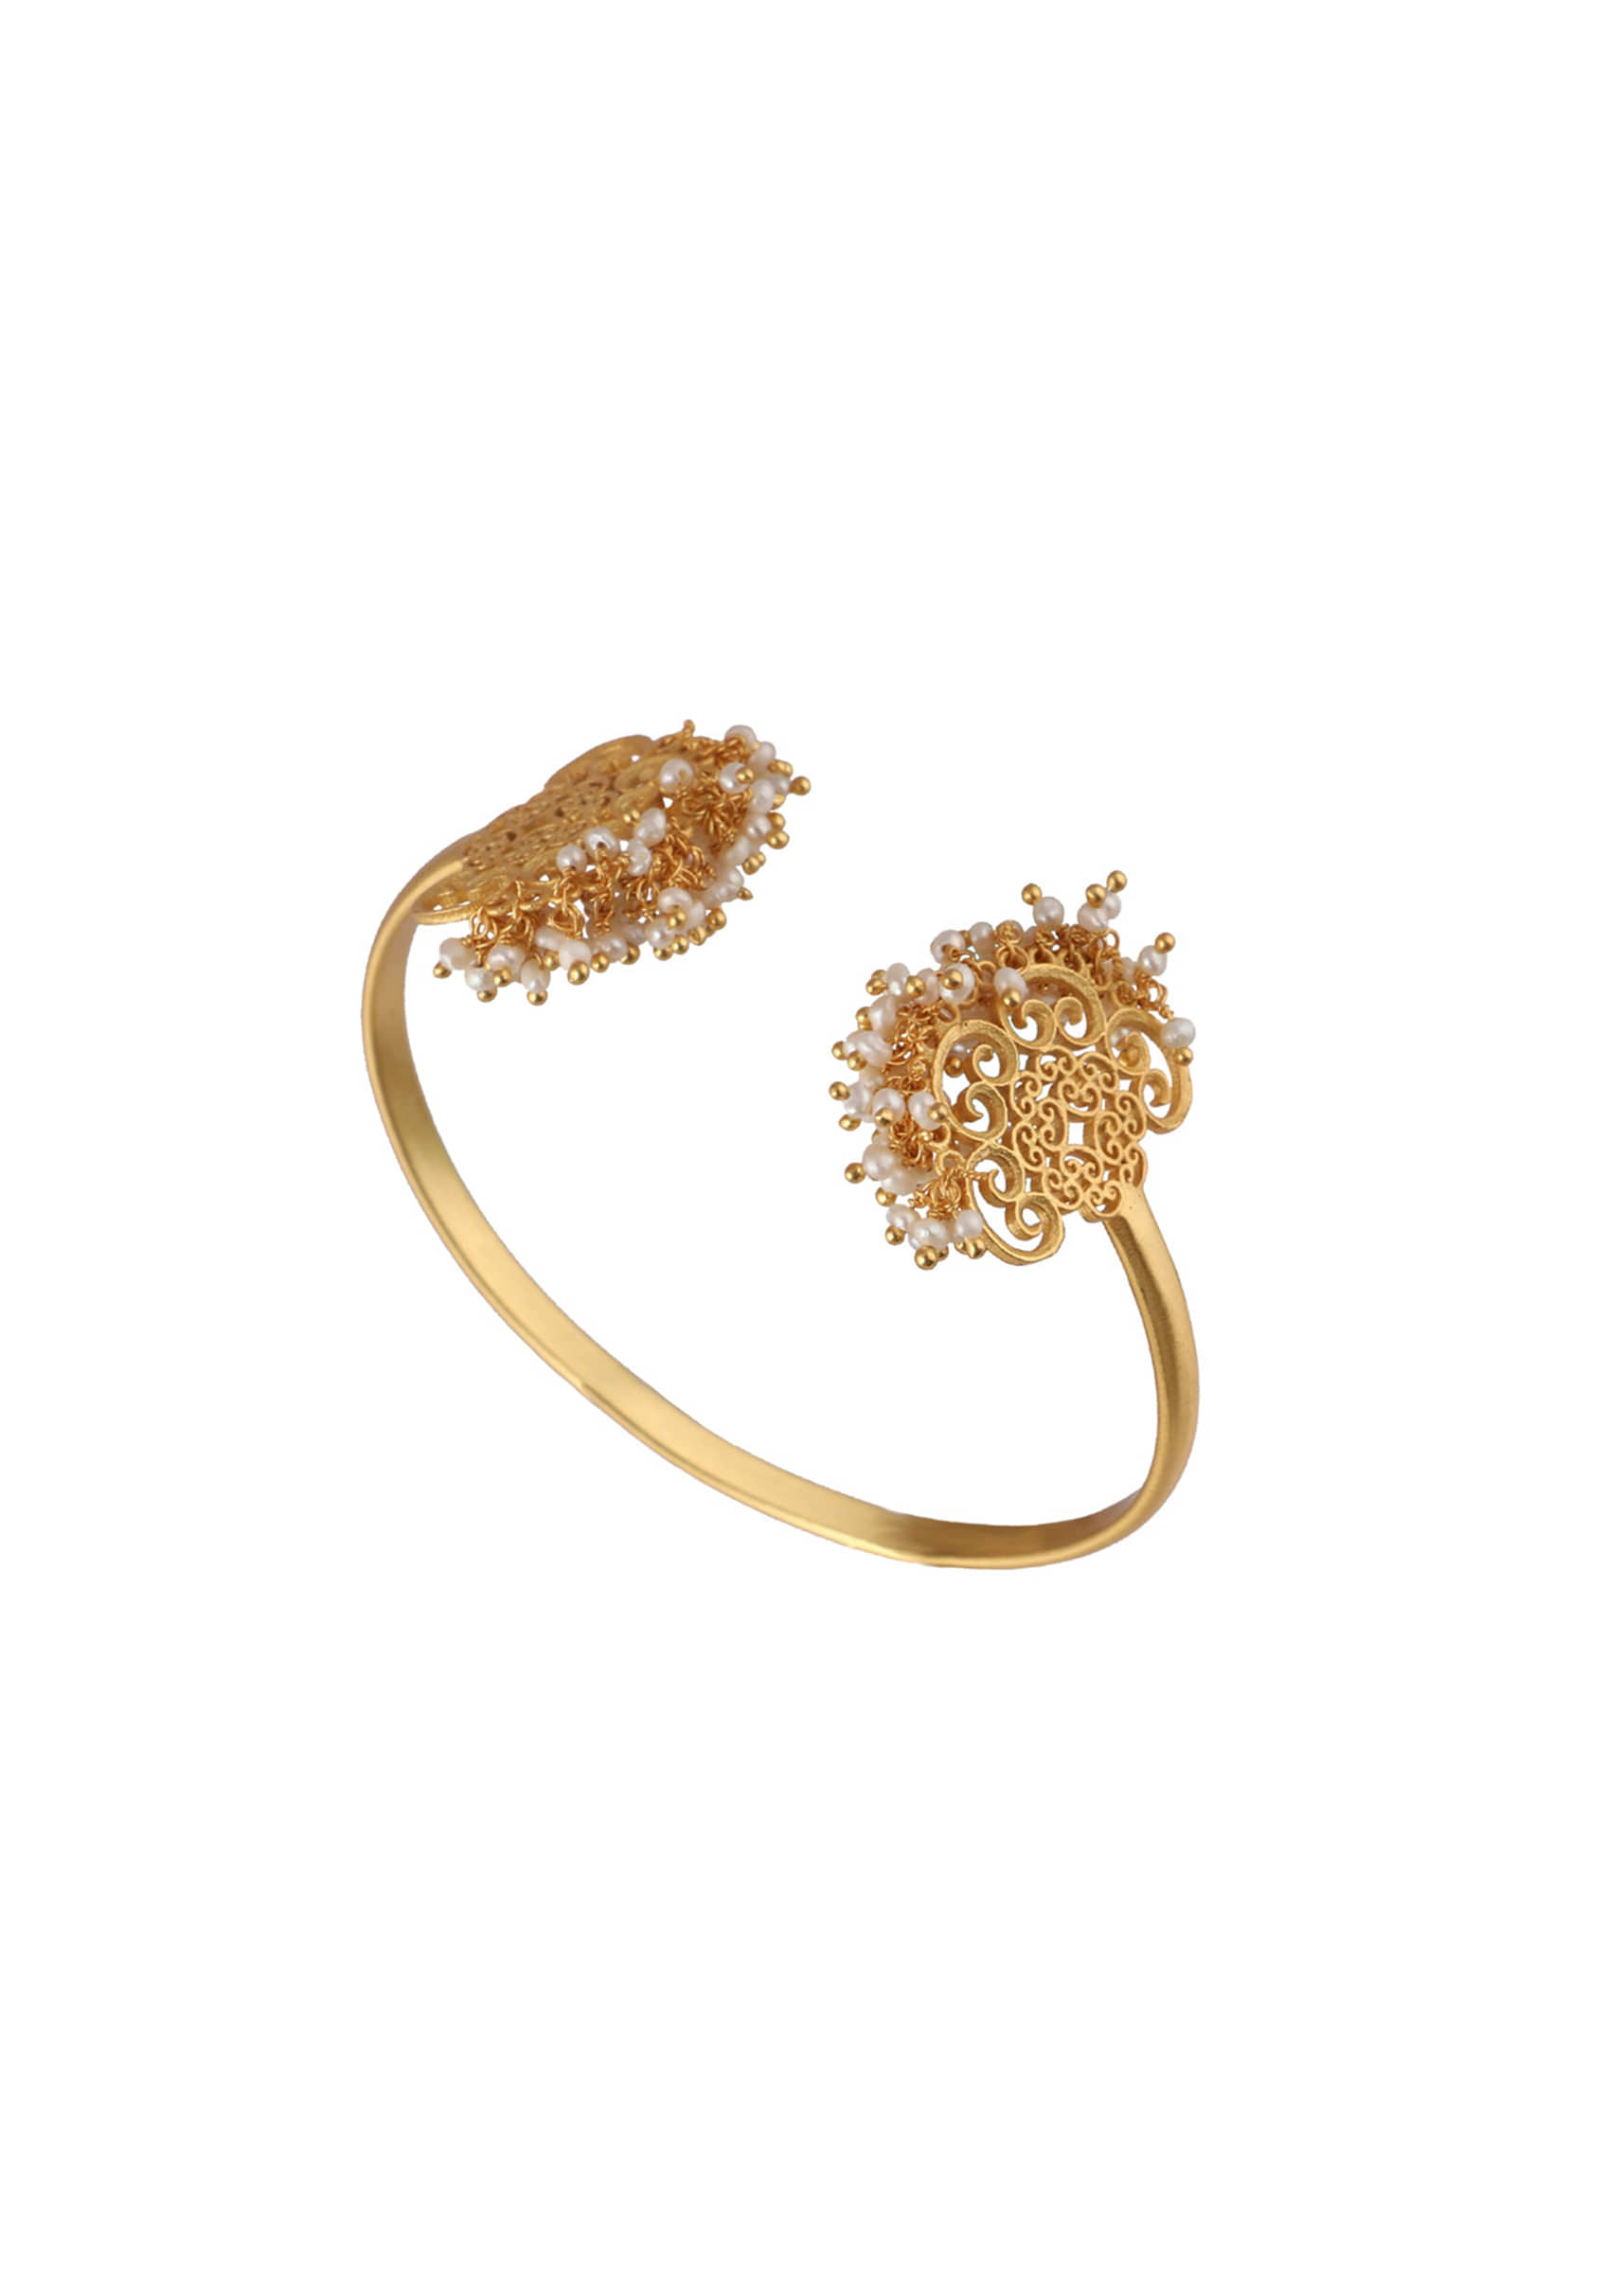 Gold Plated Bangle With Filigree Motif Lined In Pearl Beads By Zariin